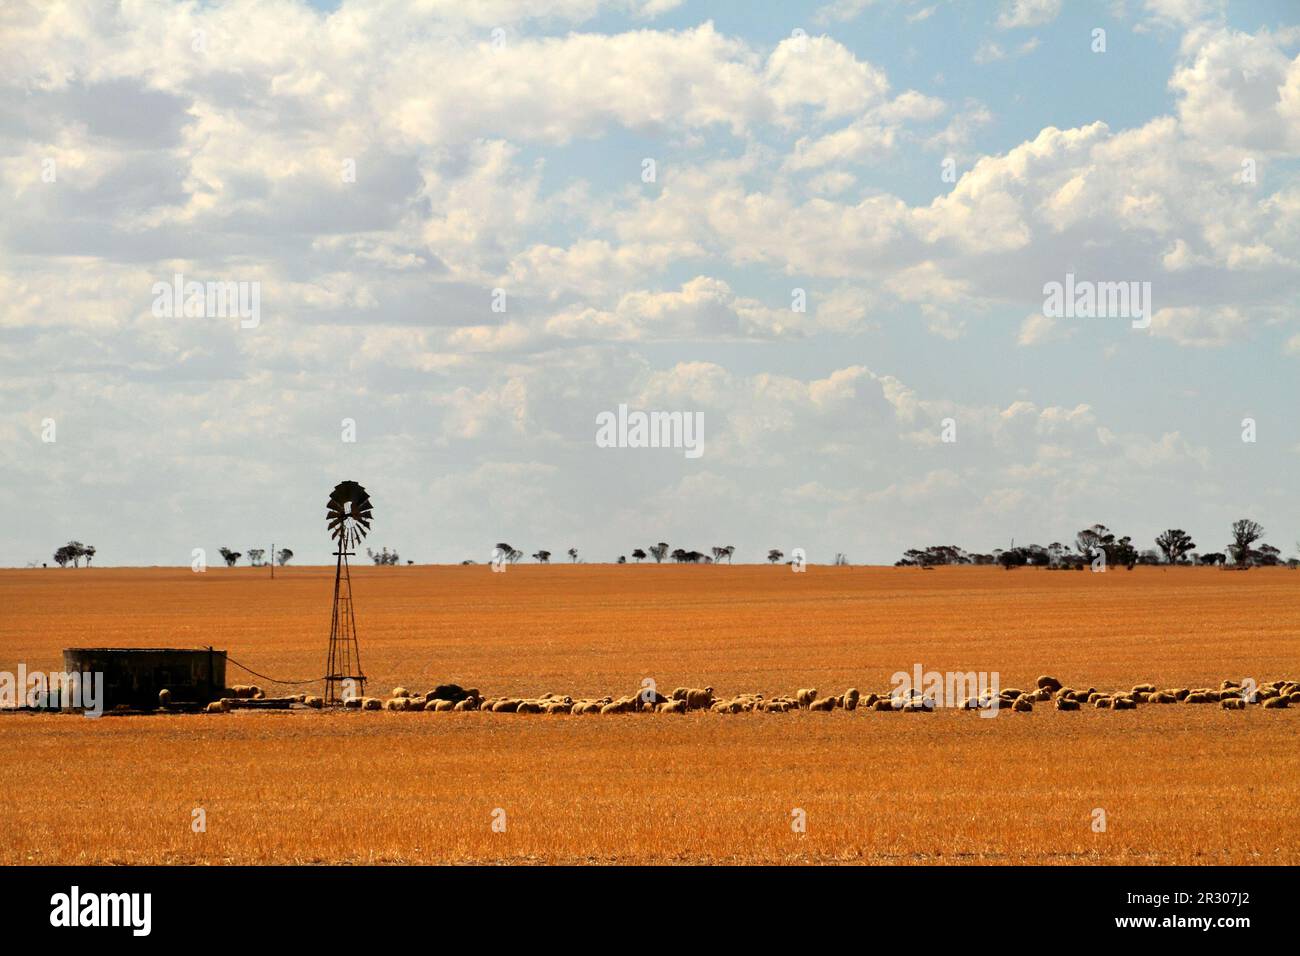 Sheep at a water trough windmill, Central Wheat Belt, Western Australia Stock Photo